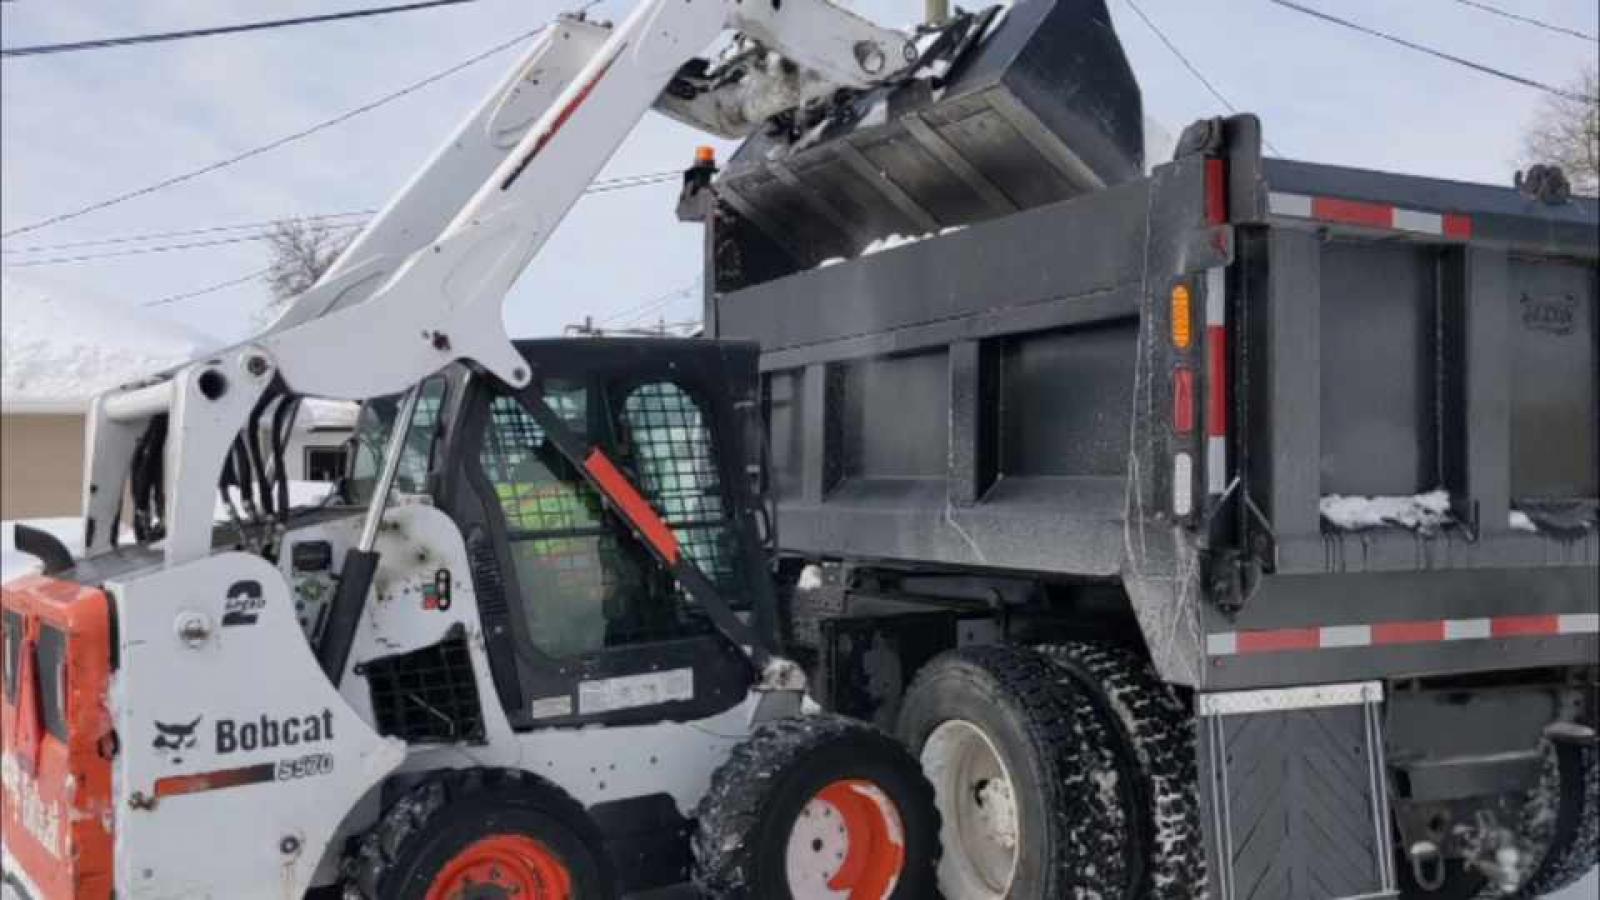 Snow Removal Services In Winnipeg | Skid Steer And Dump Truck